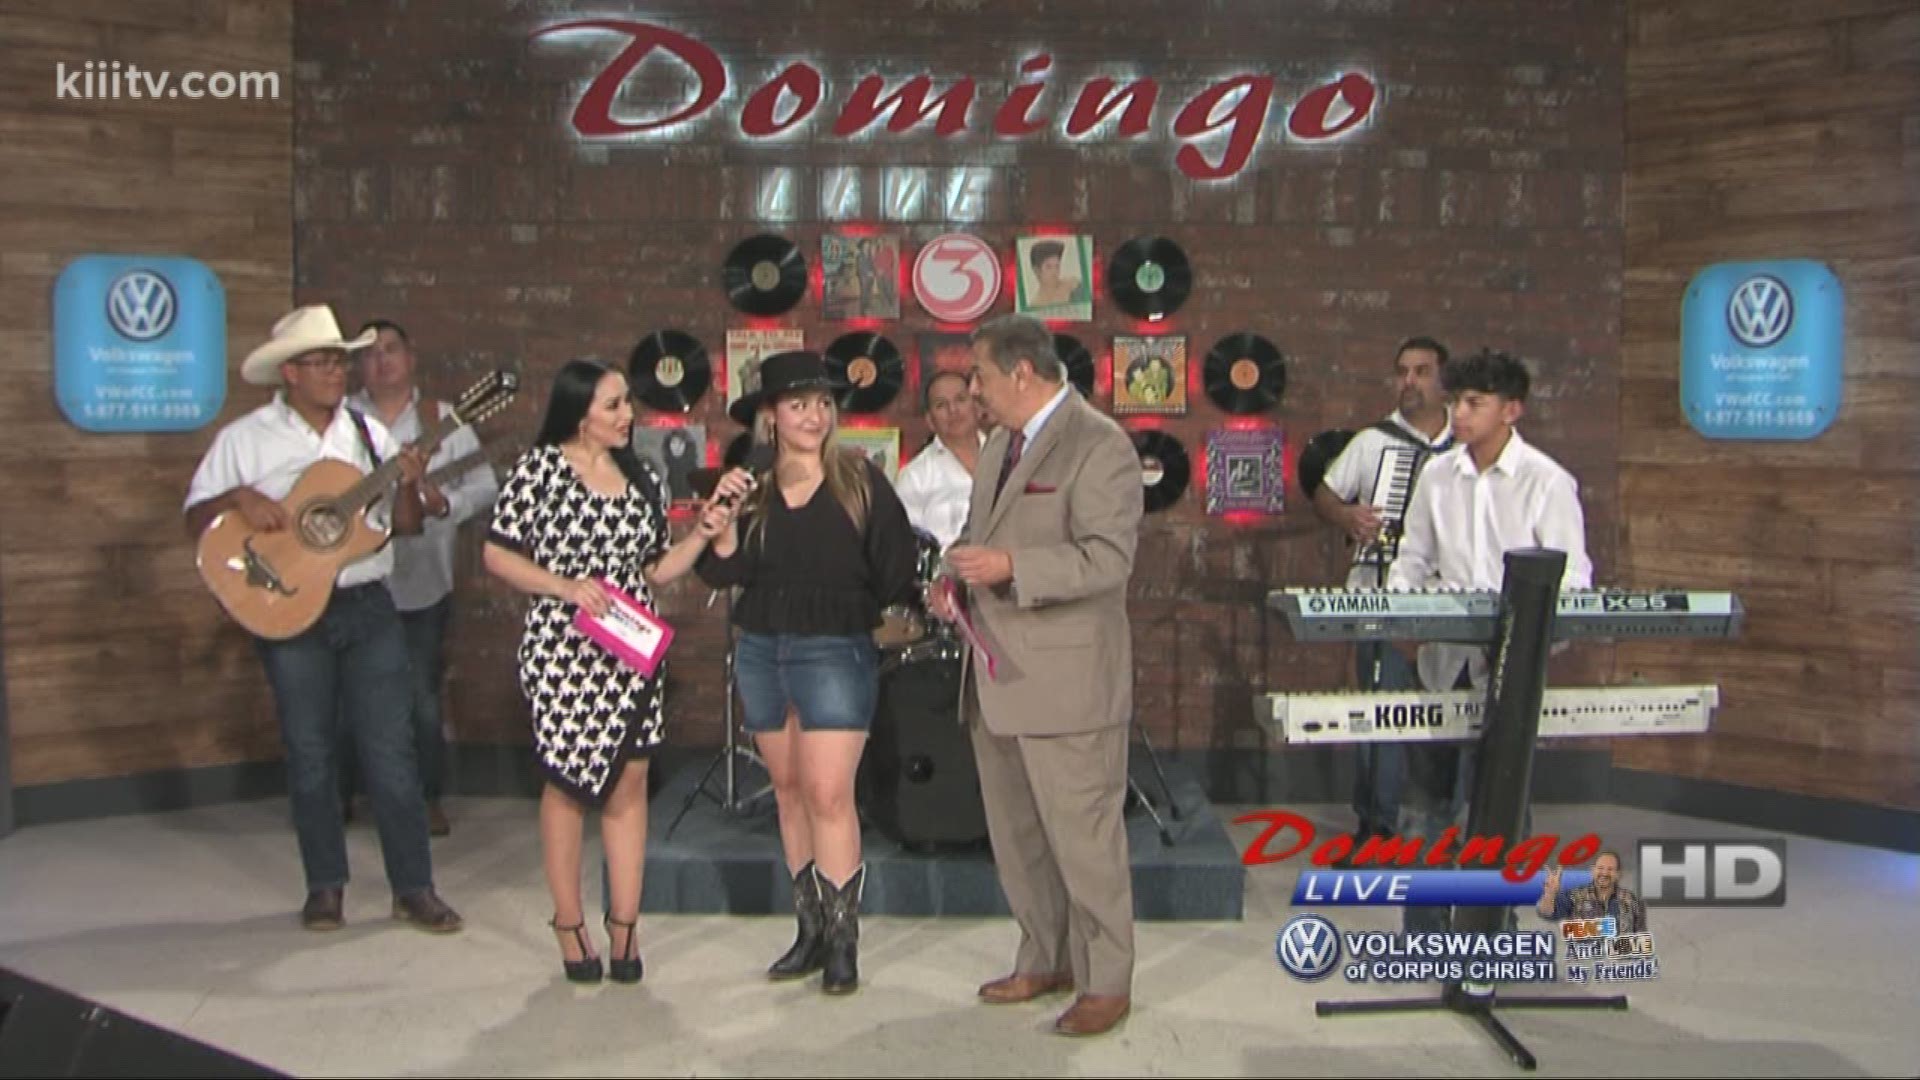 Kumbia VI interviewing with Domingo Live Hosts, Barbi Leo and Rudy Trevino.